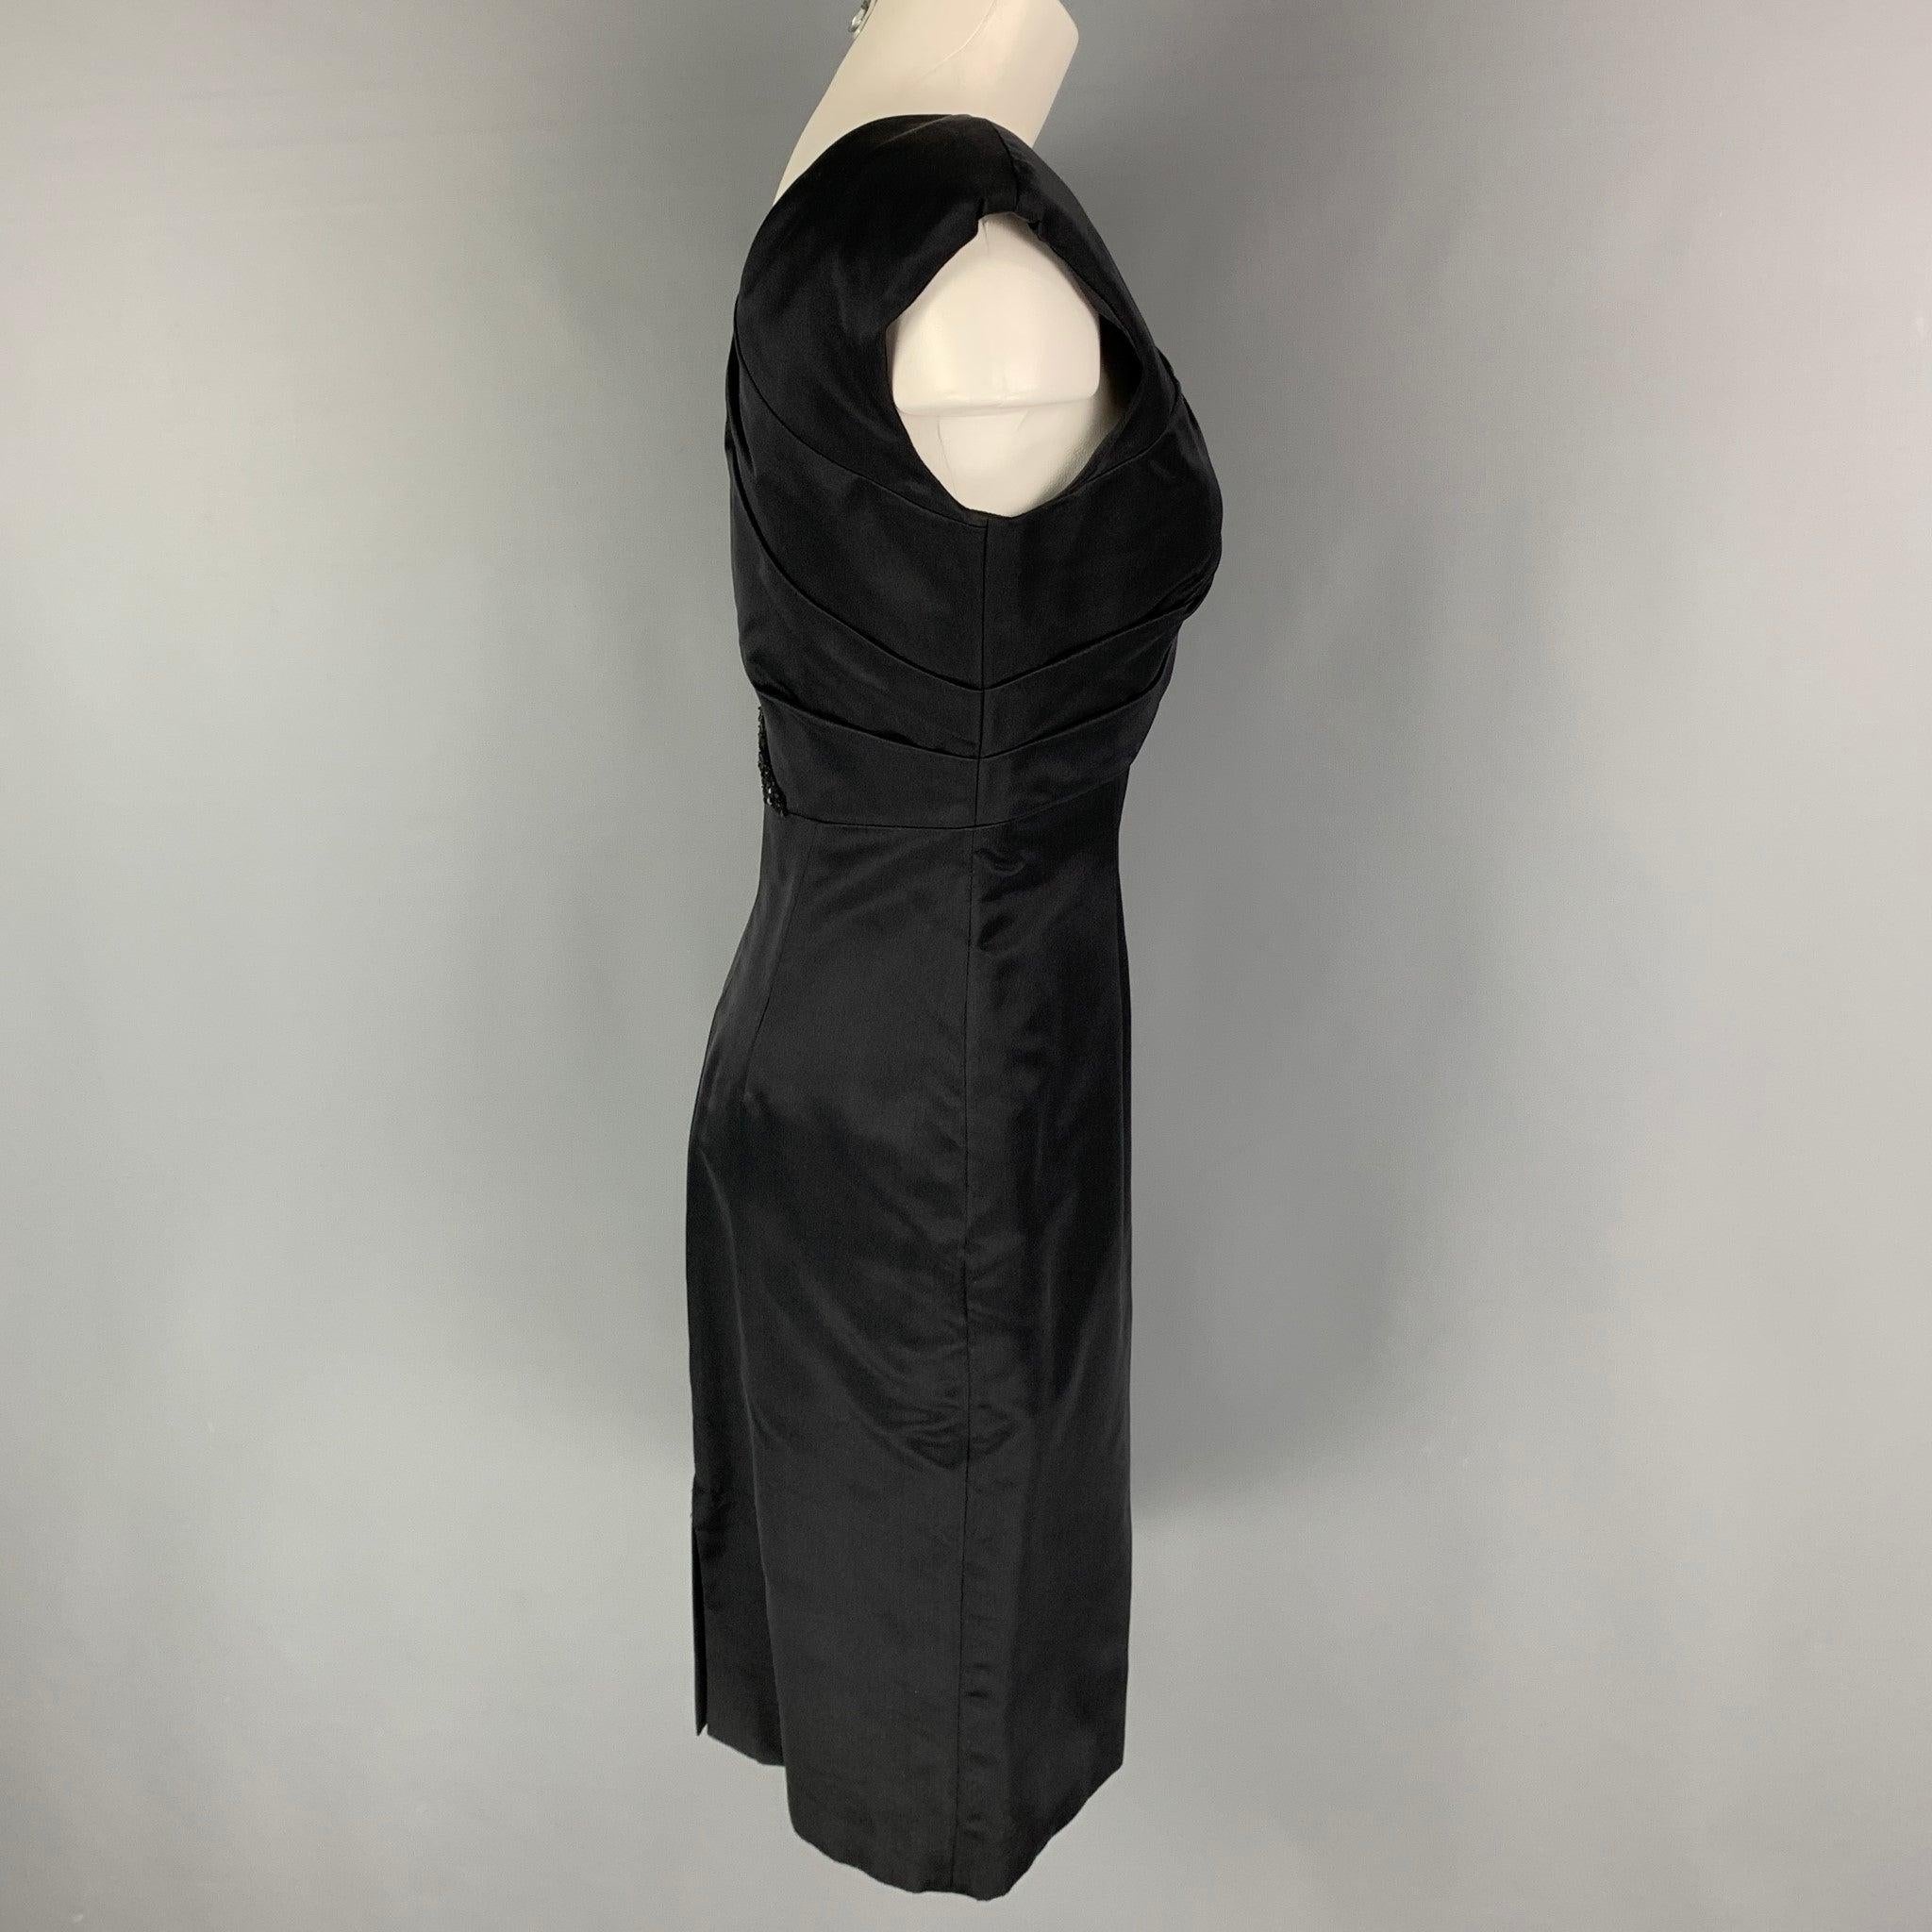 MONIQUE LHUILLIER Size 4 Black Gold Silk Rayon Sequined Cocktail Dress In Good Condition For Sale In San Francisco, CA